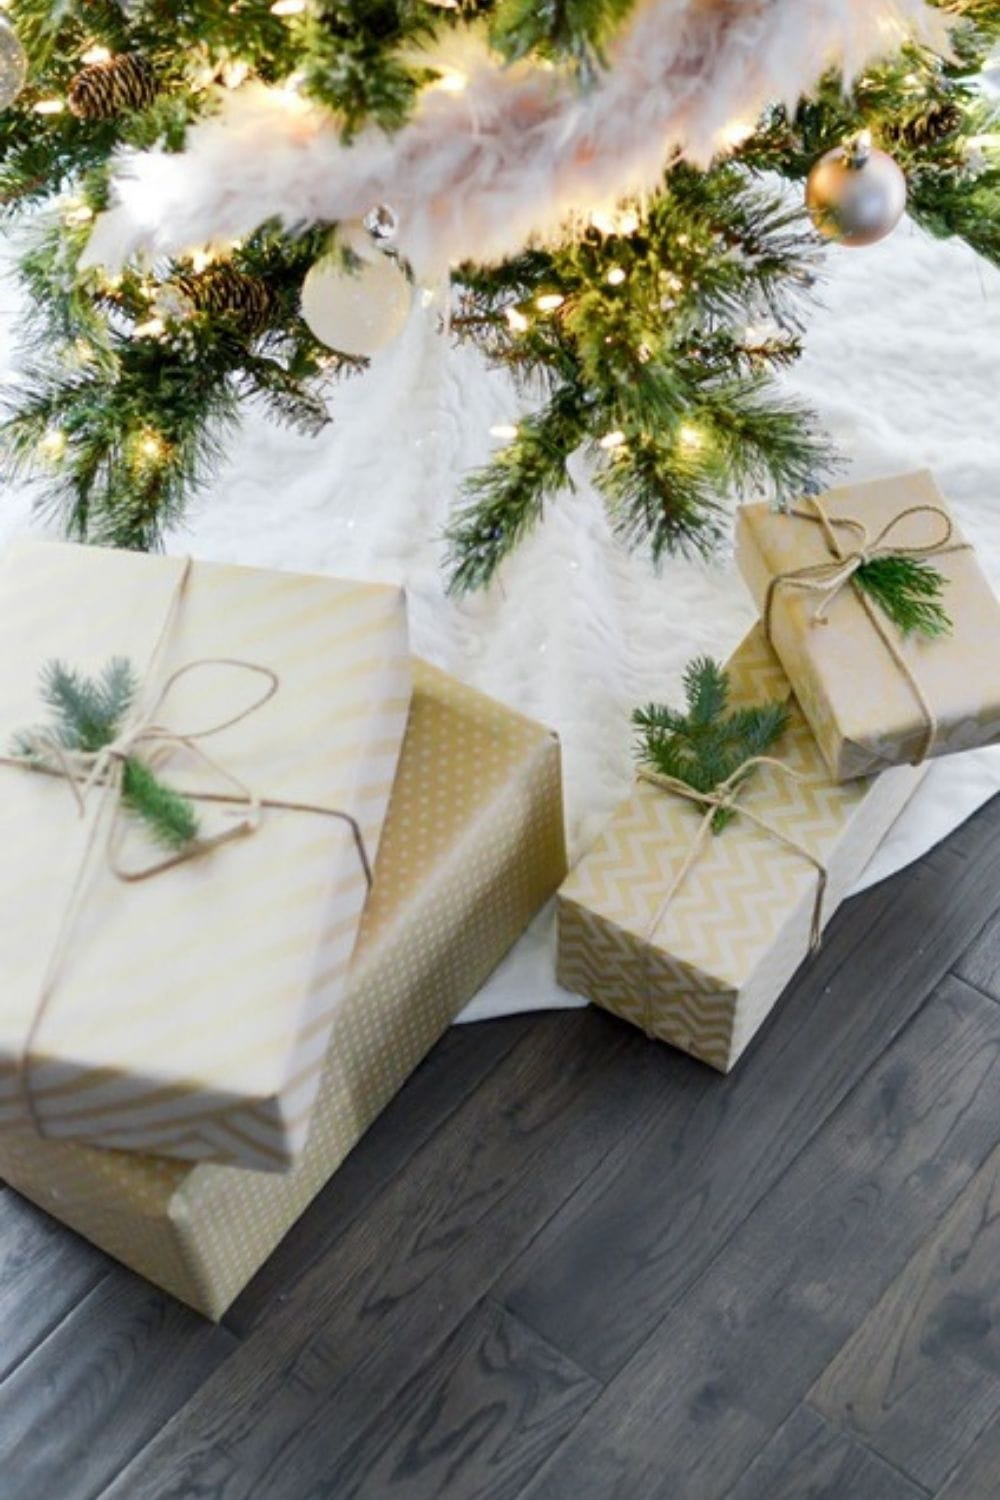 Gifts under a tree